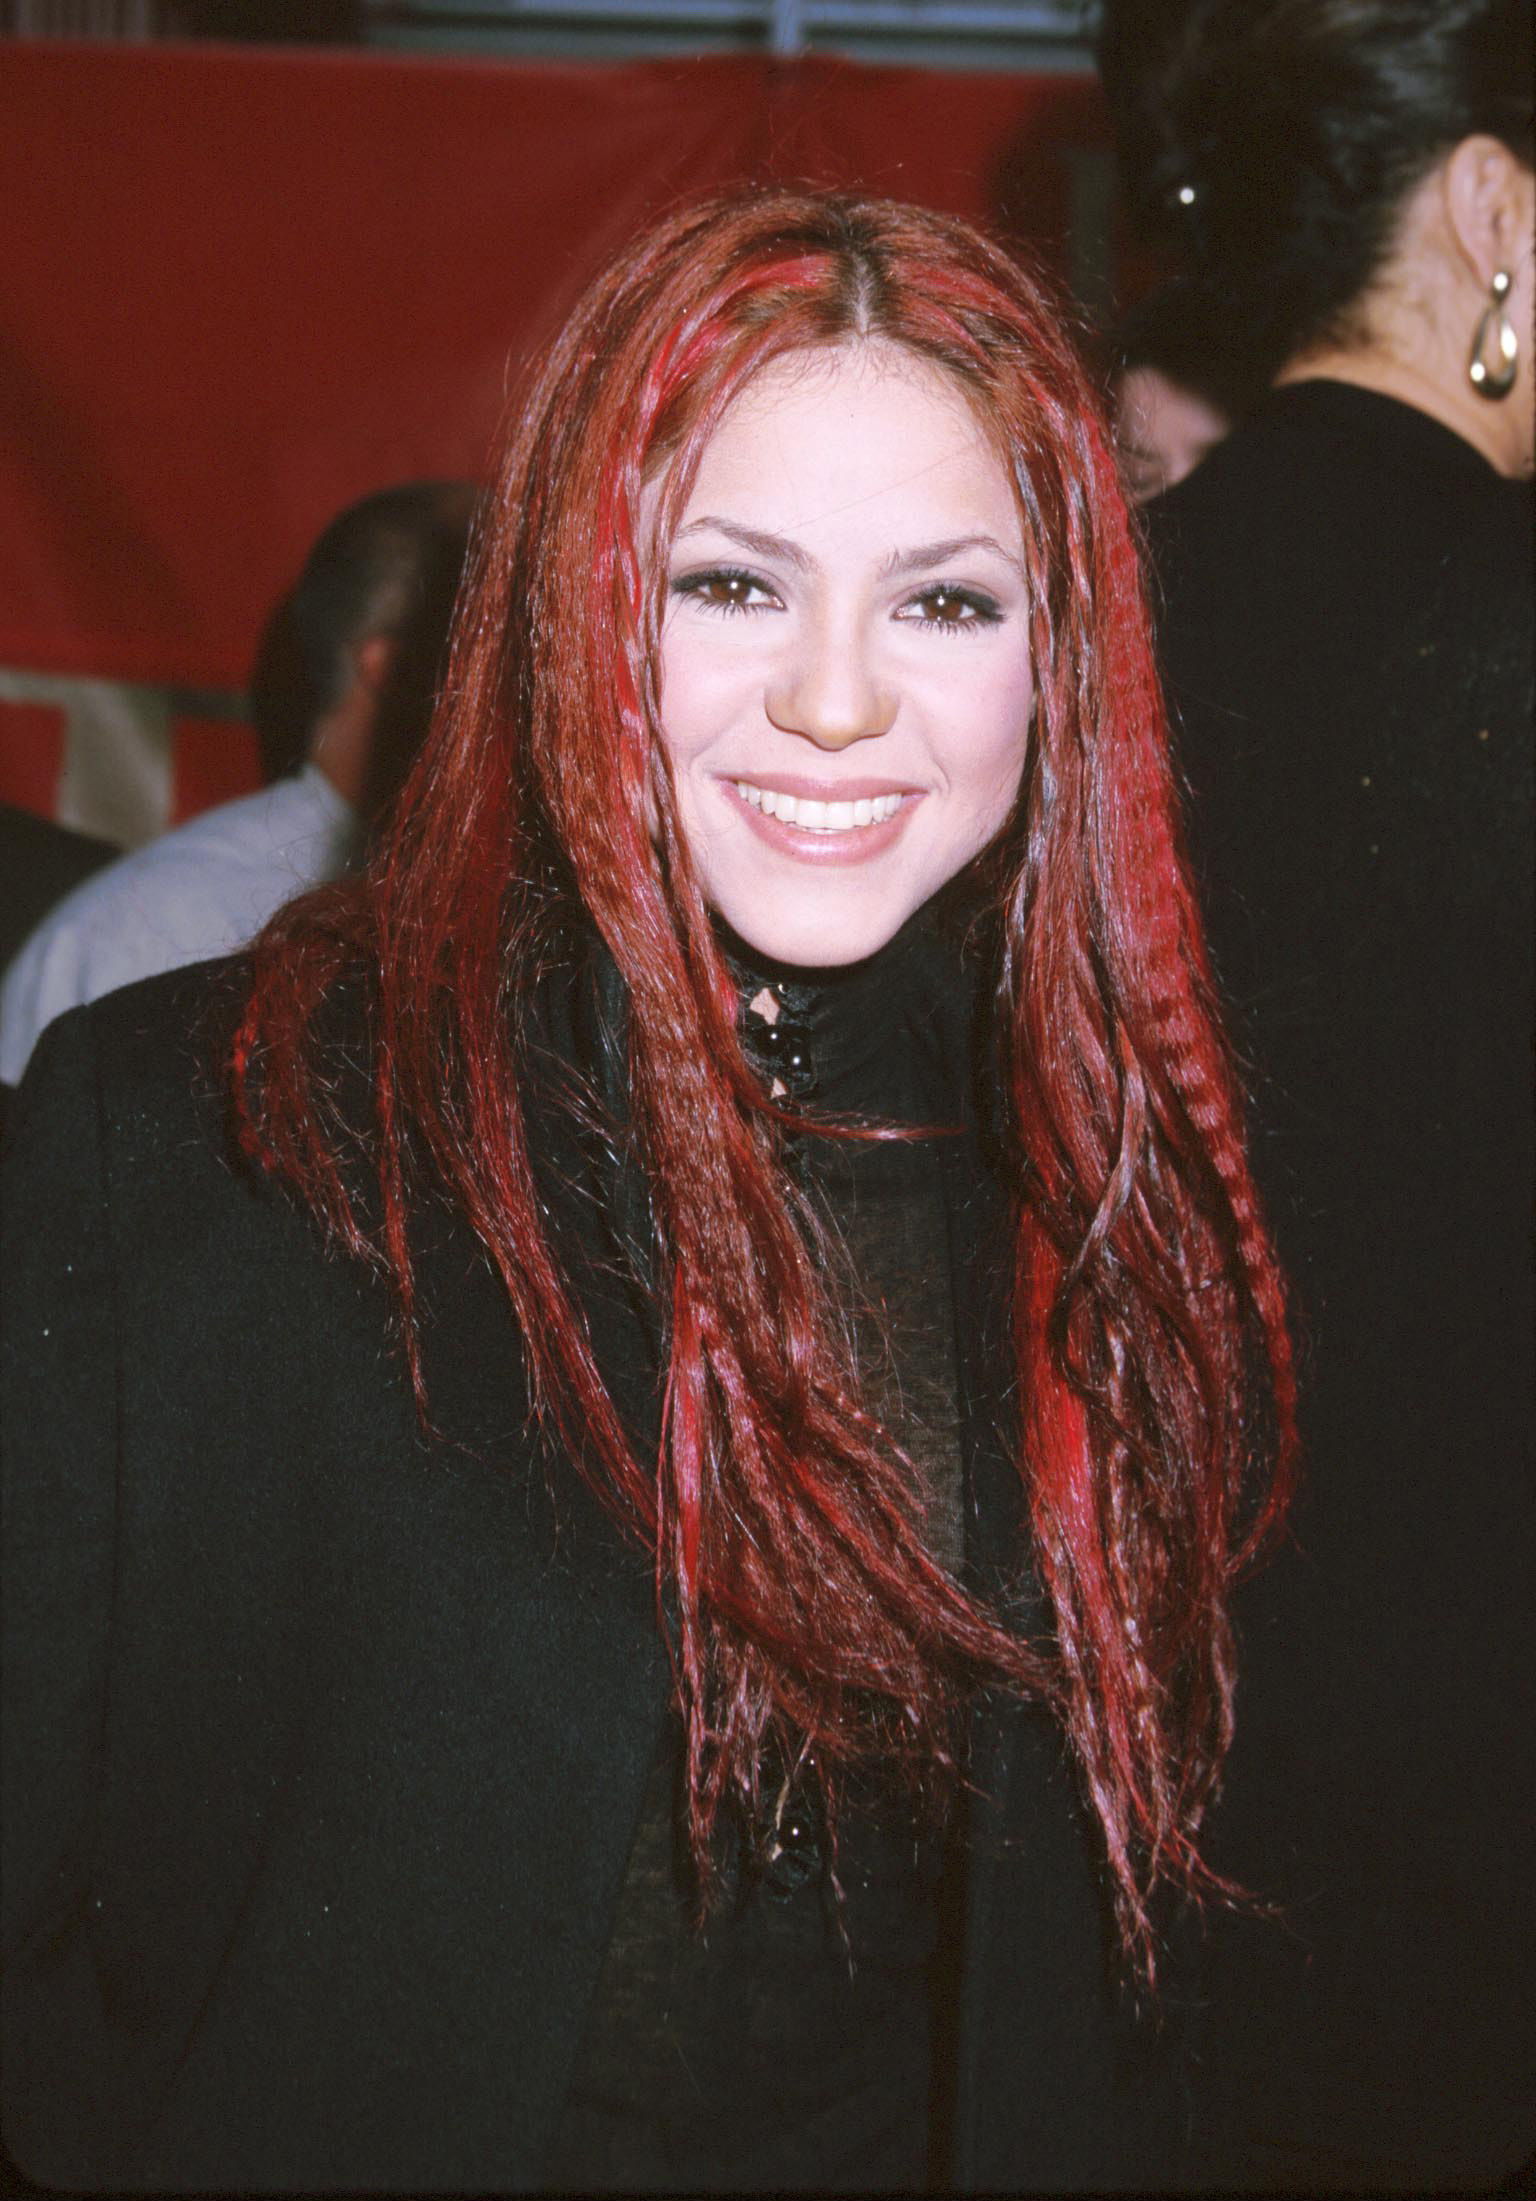 Smiling woman with long red-streaked hair, wearing a black outfit on the red carpet